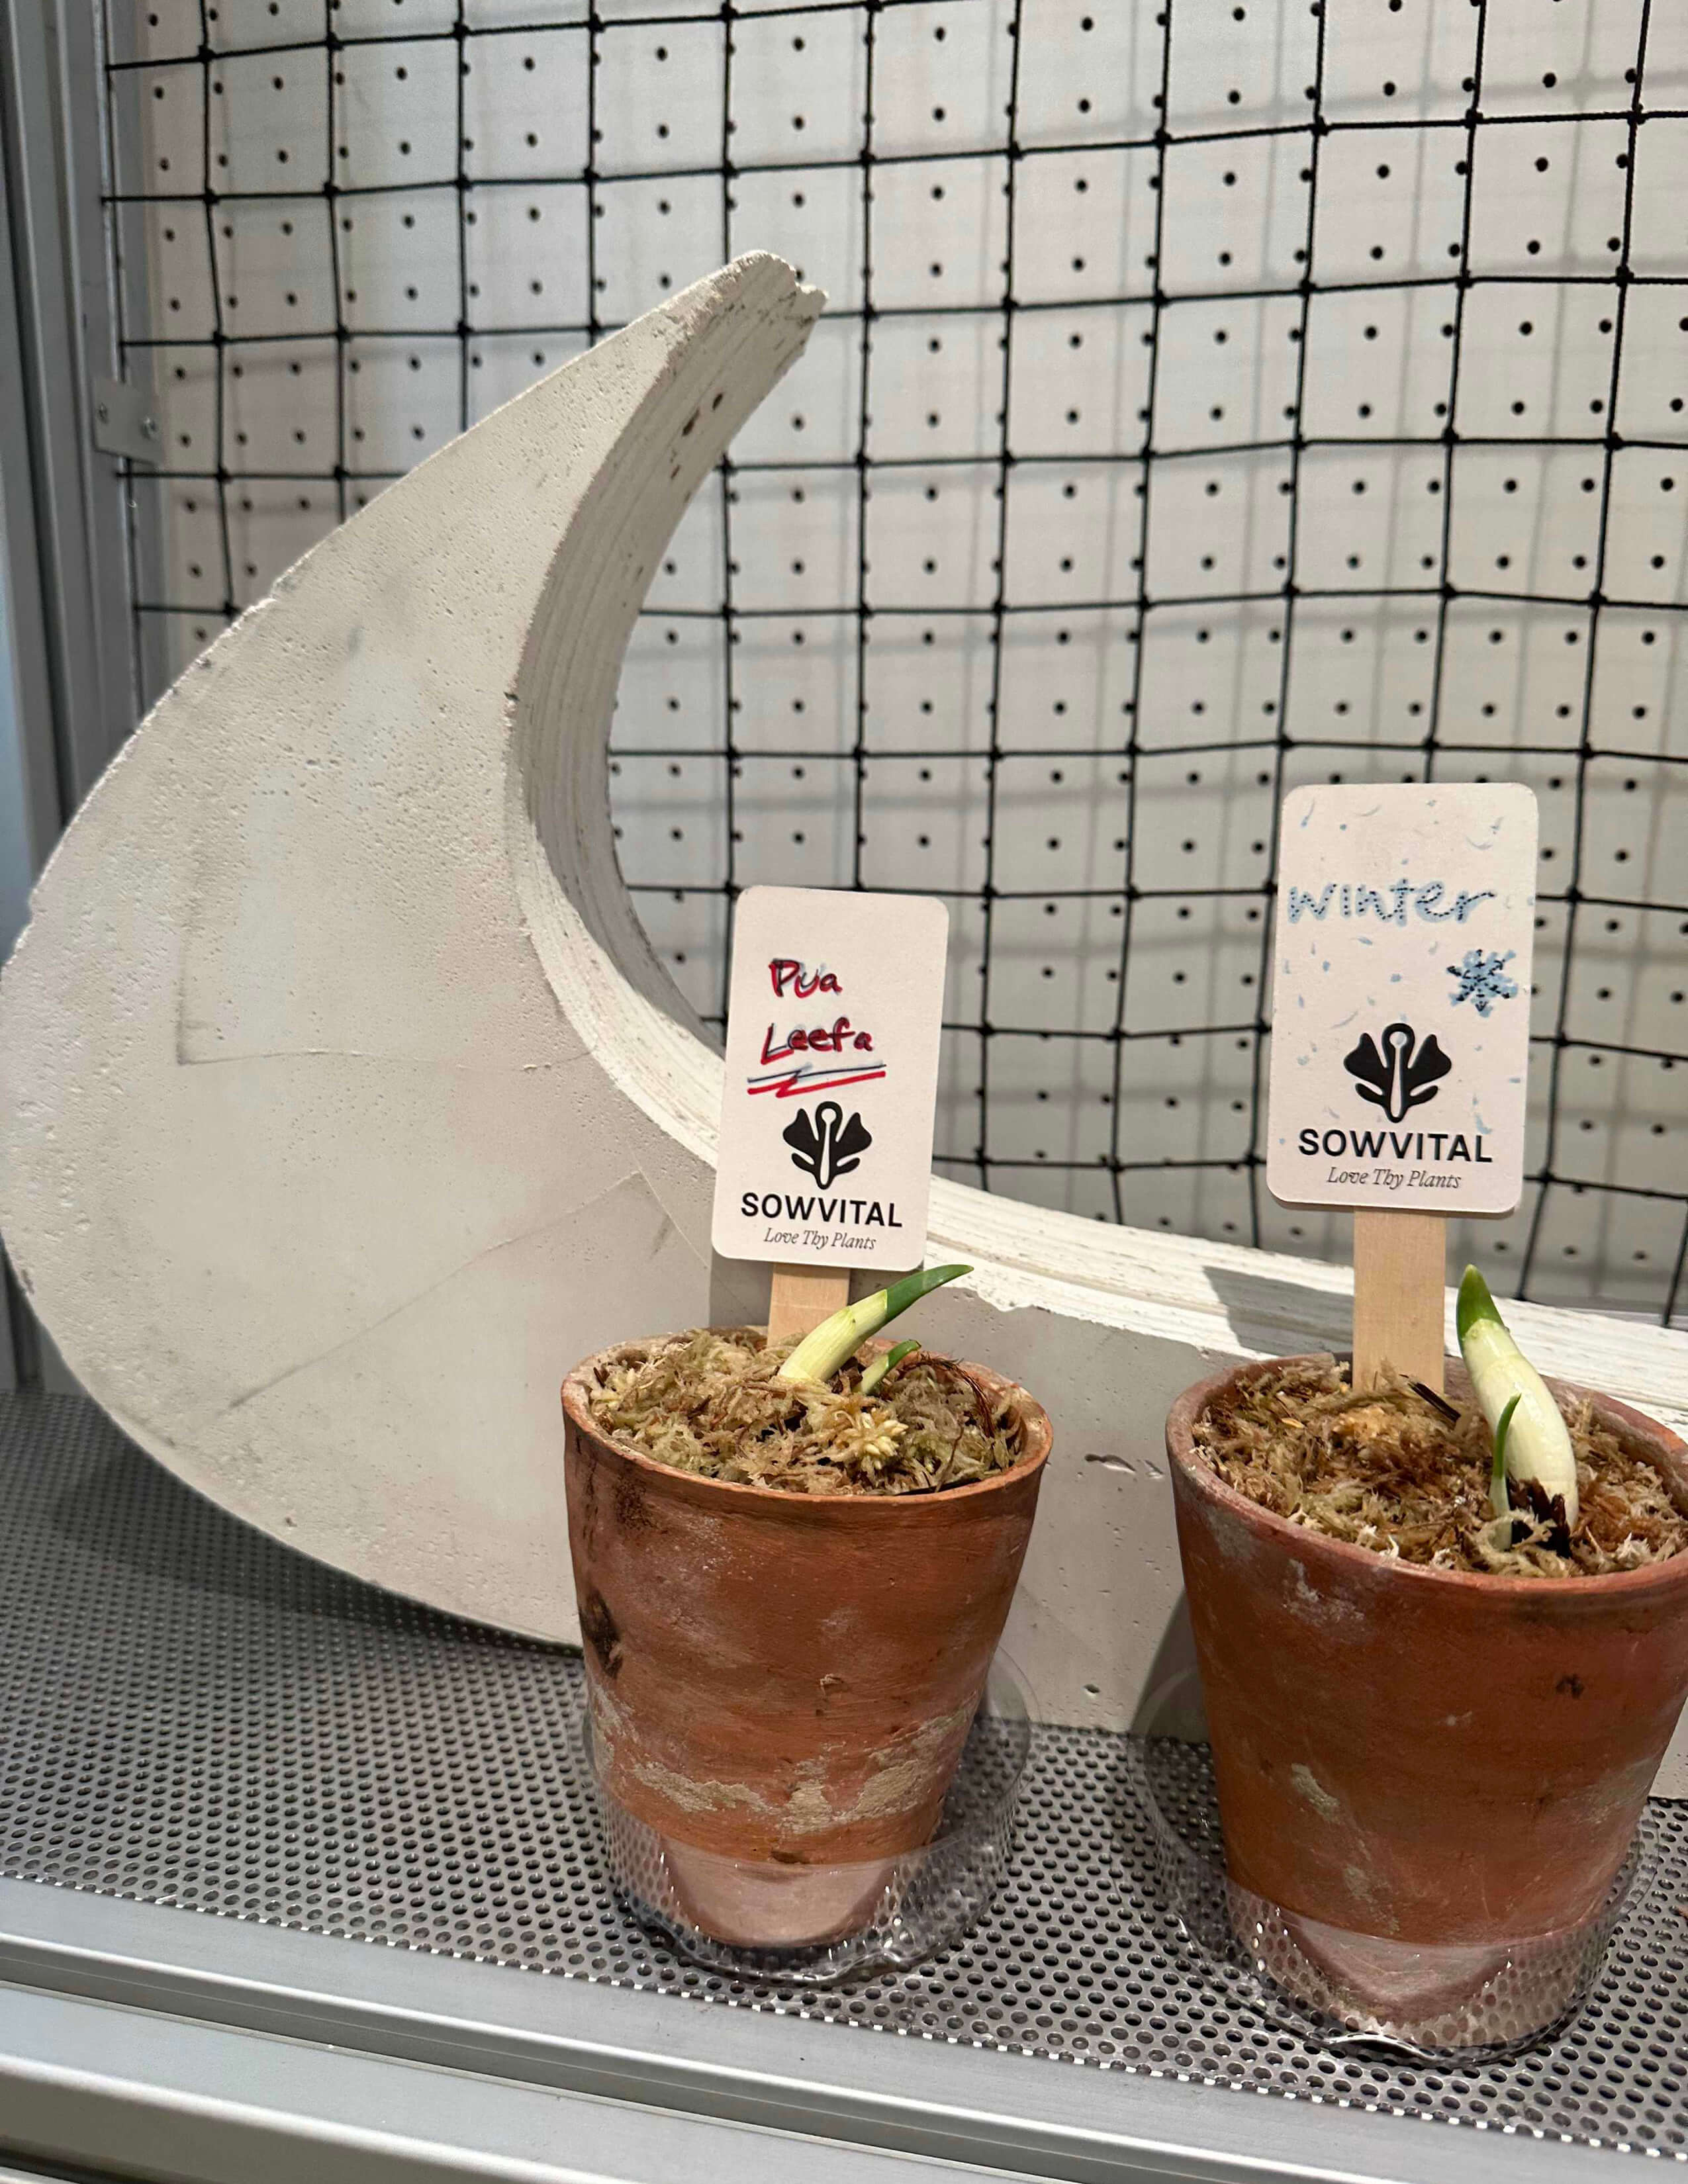 Two pots of plants with Sowvital logo cards sticking in with Nike’s logo behind them.